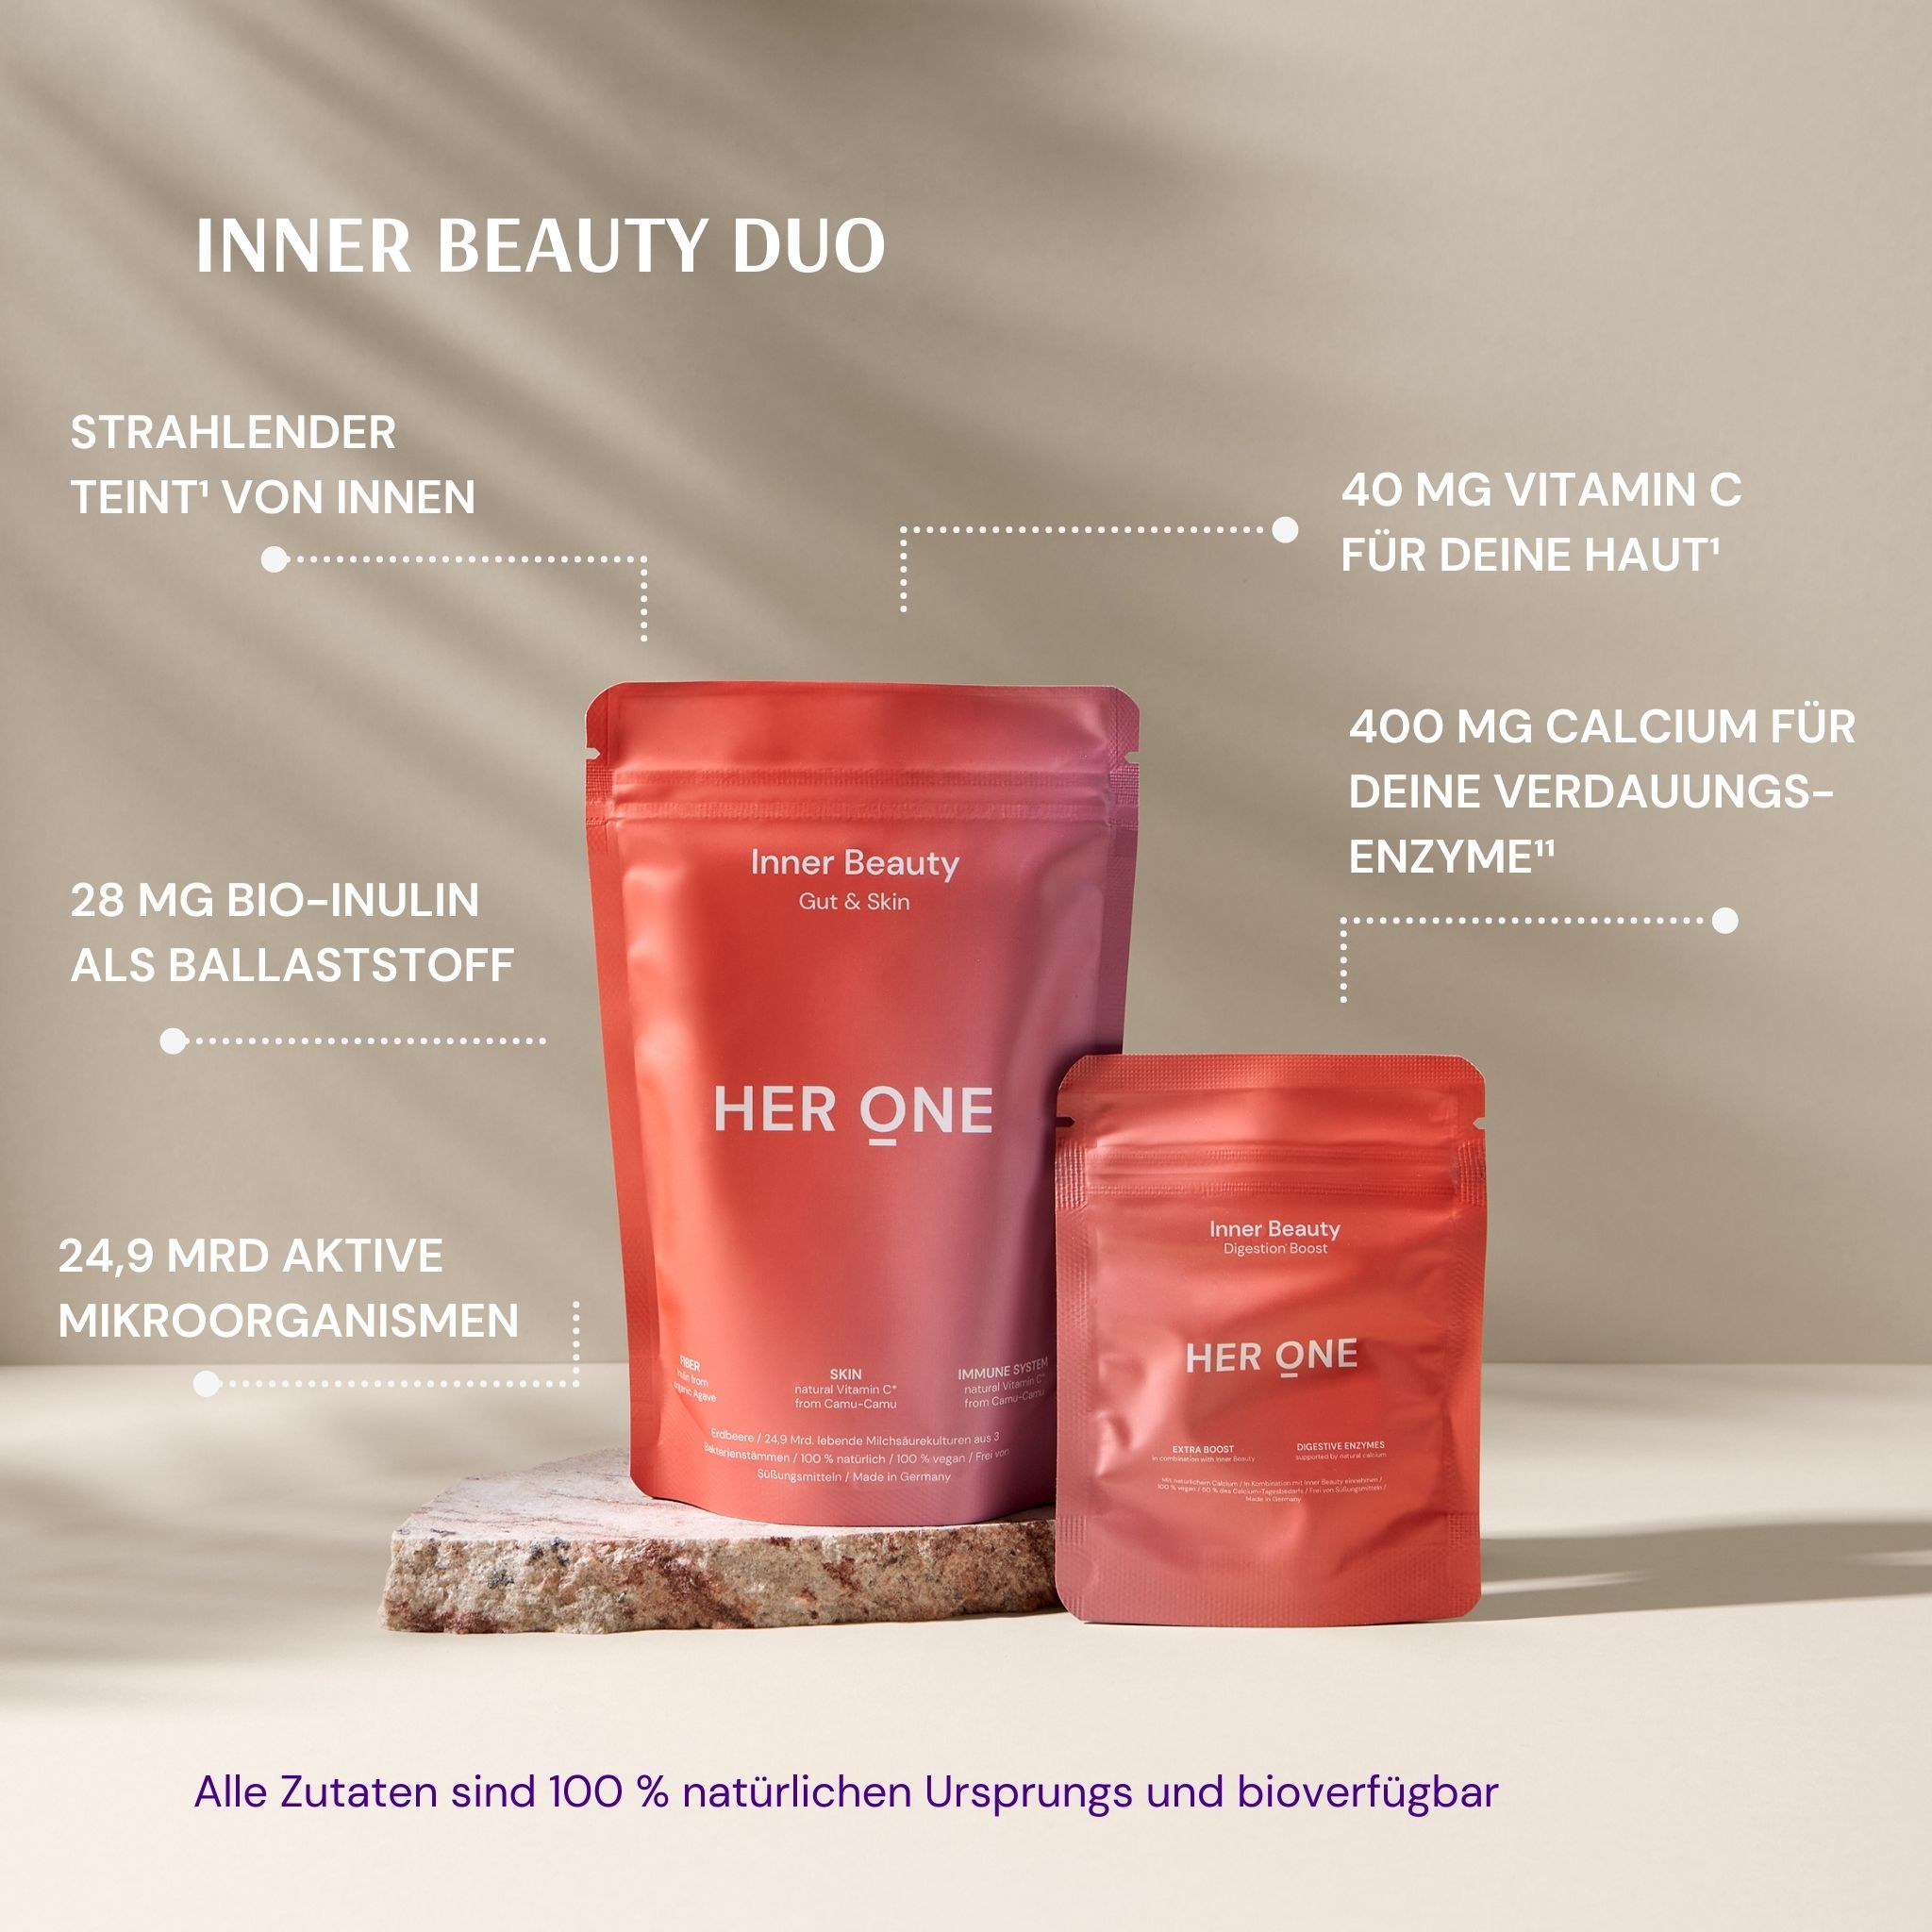 HER ONE Inner Beauty Duo-Set (Classic) 1 St 